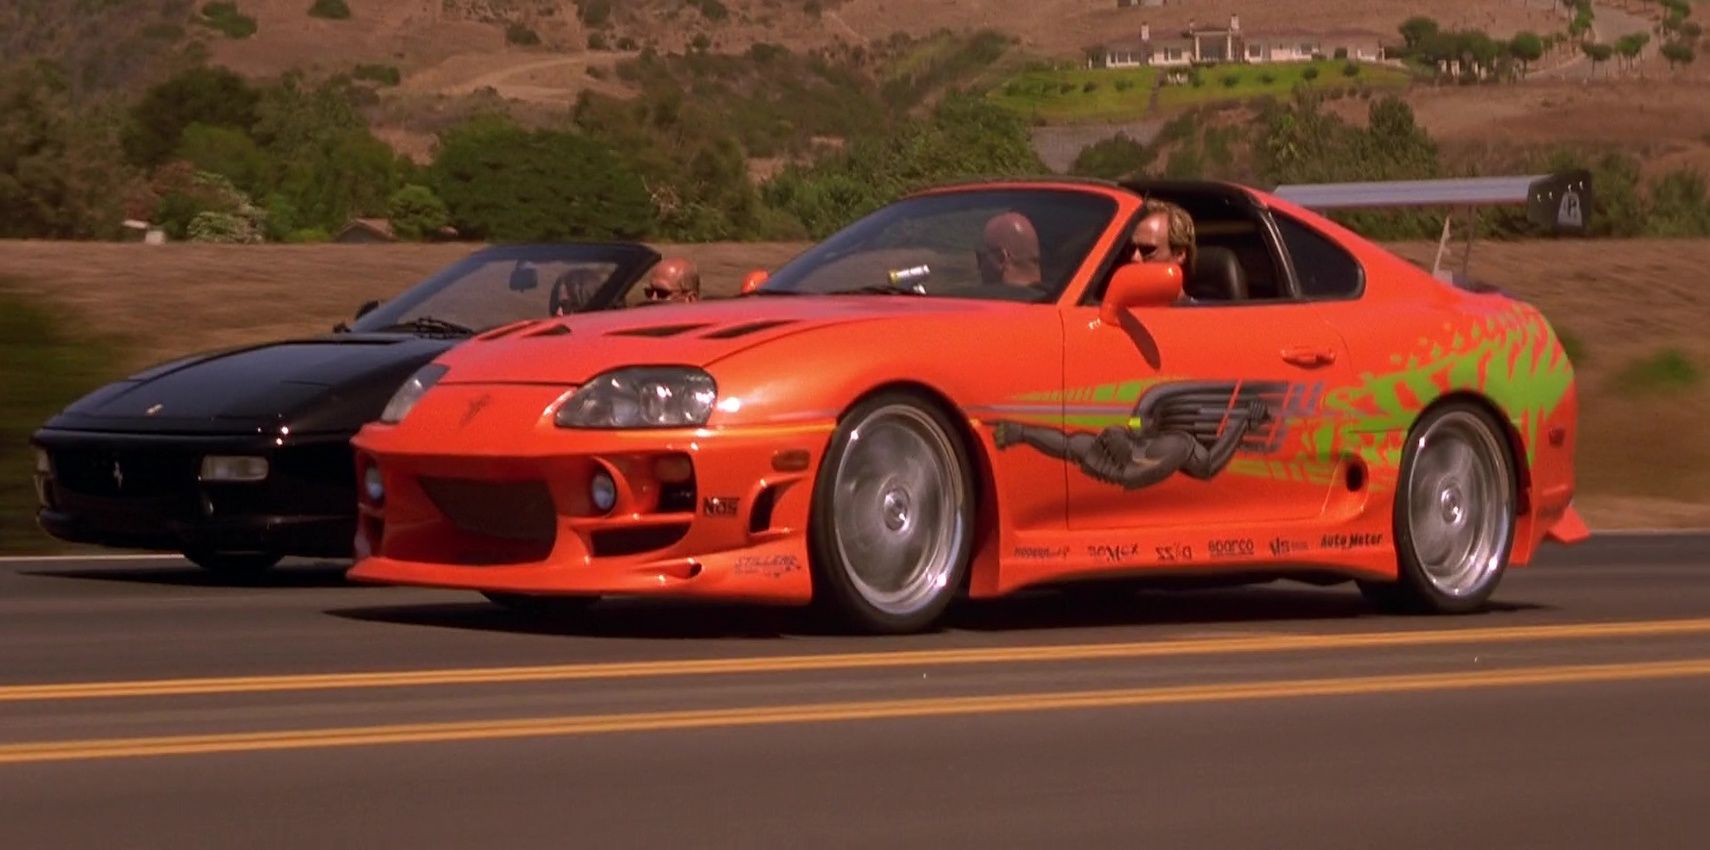 Toyota Supra racing against a Ferrari on a highway in The Fast And The Furious 